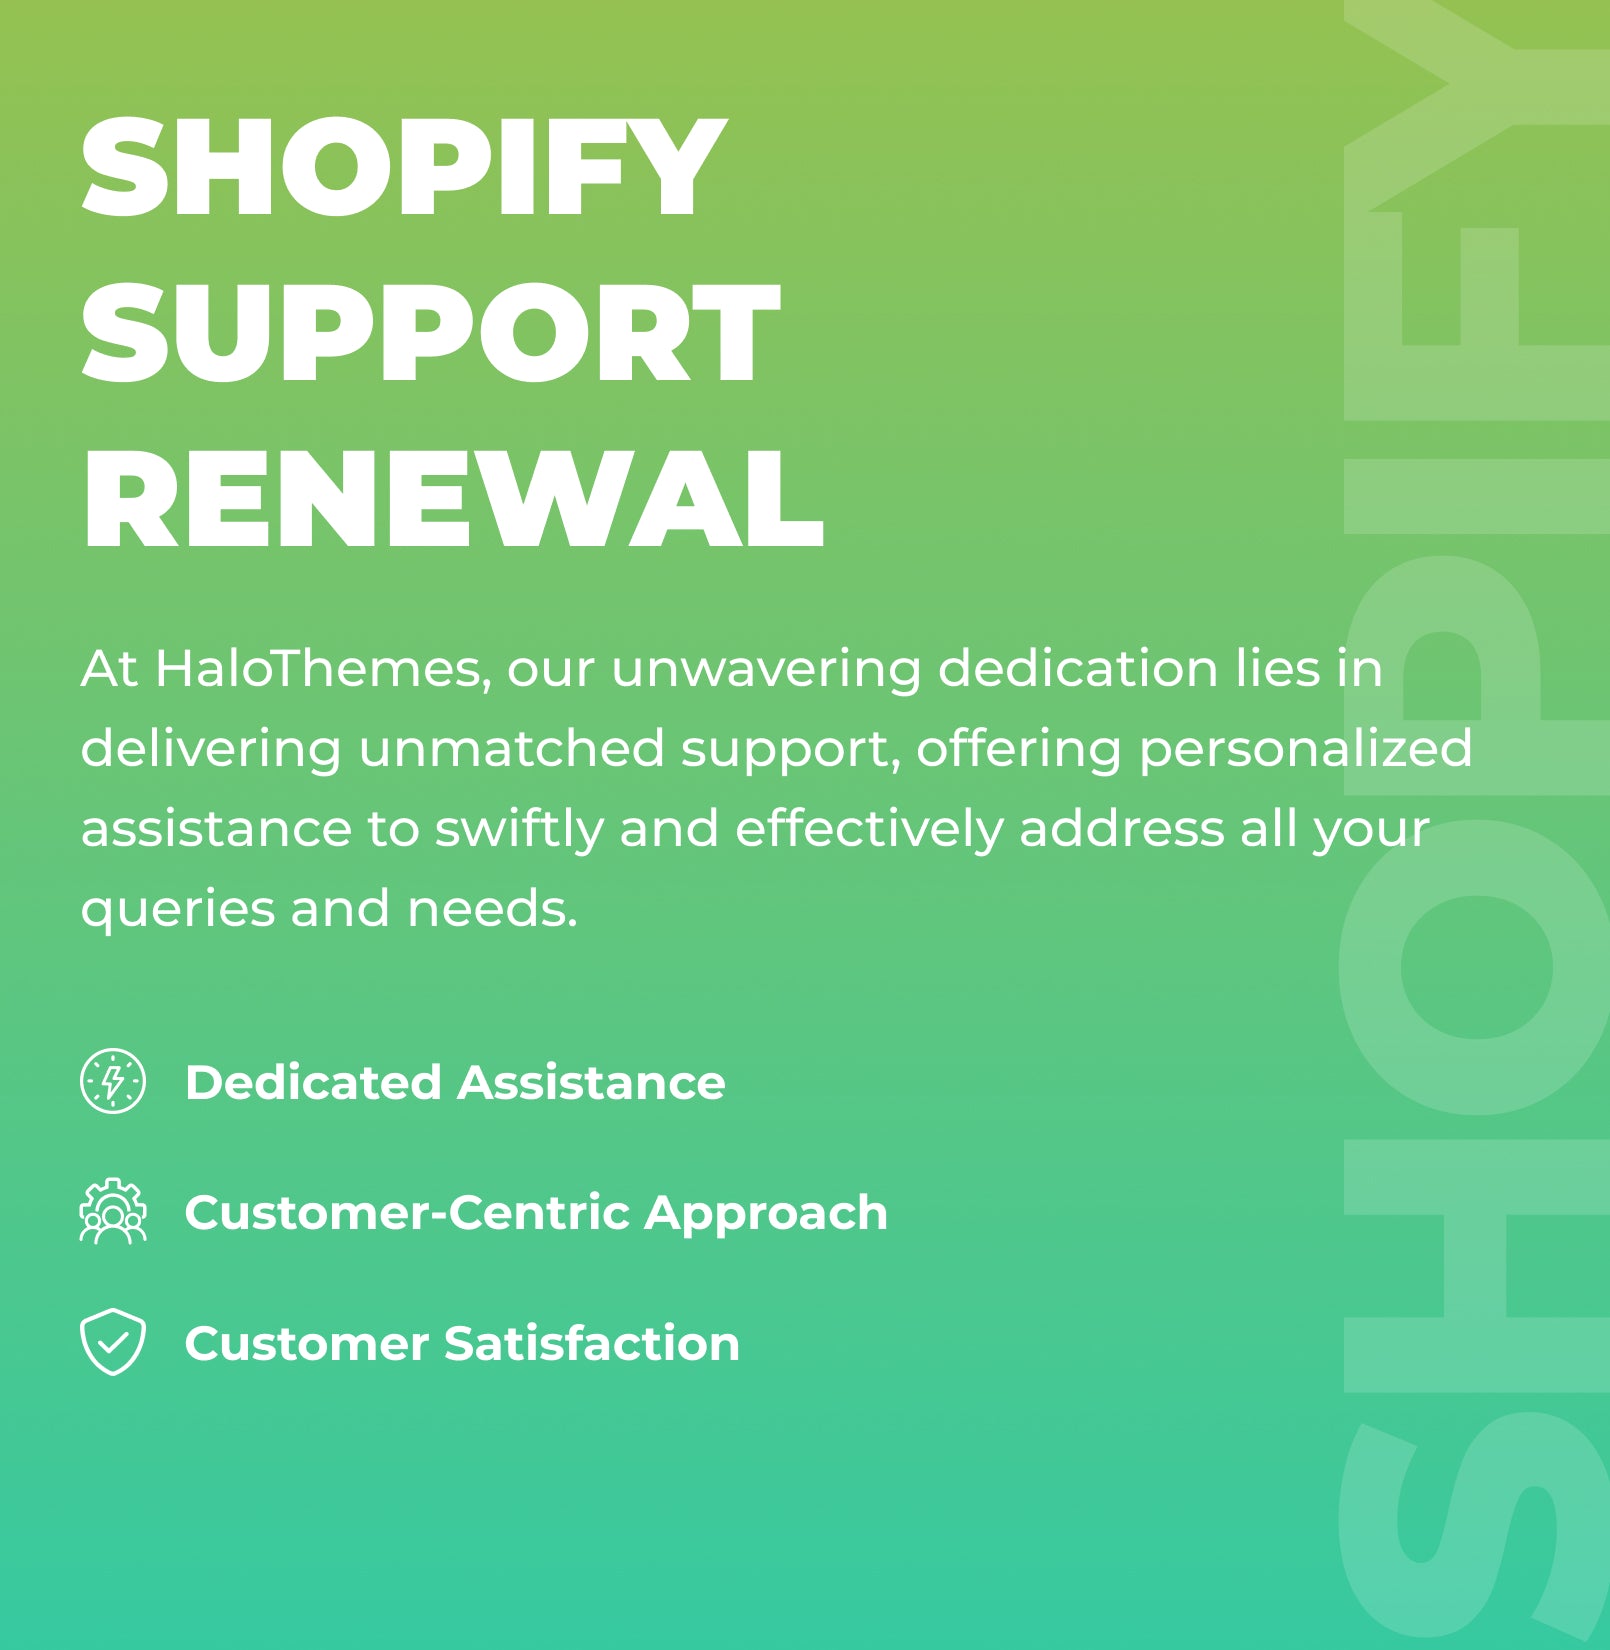 Shopify Support Renewal